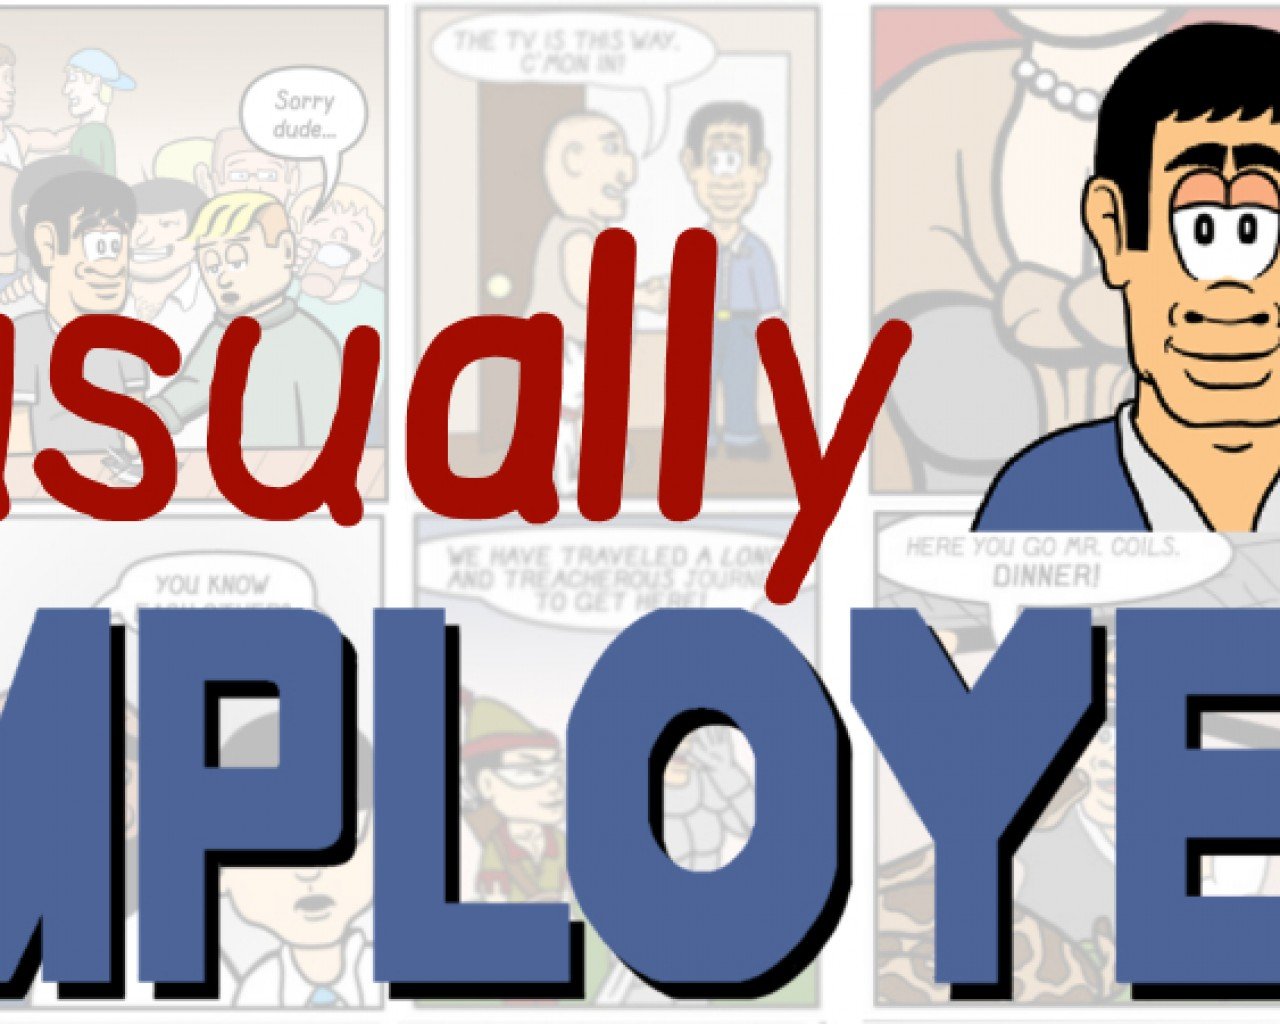 Poster Image for Casually Employed